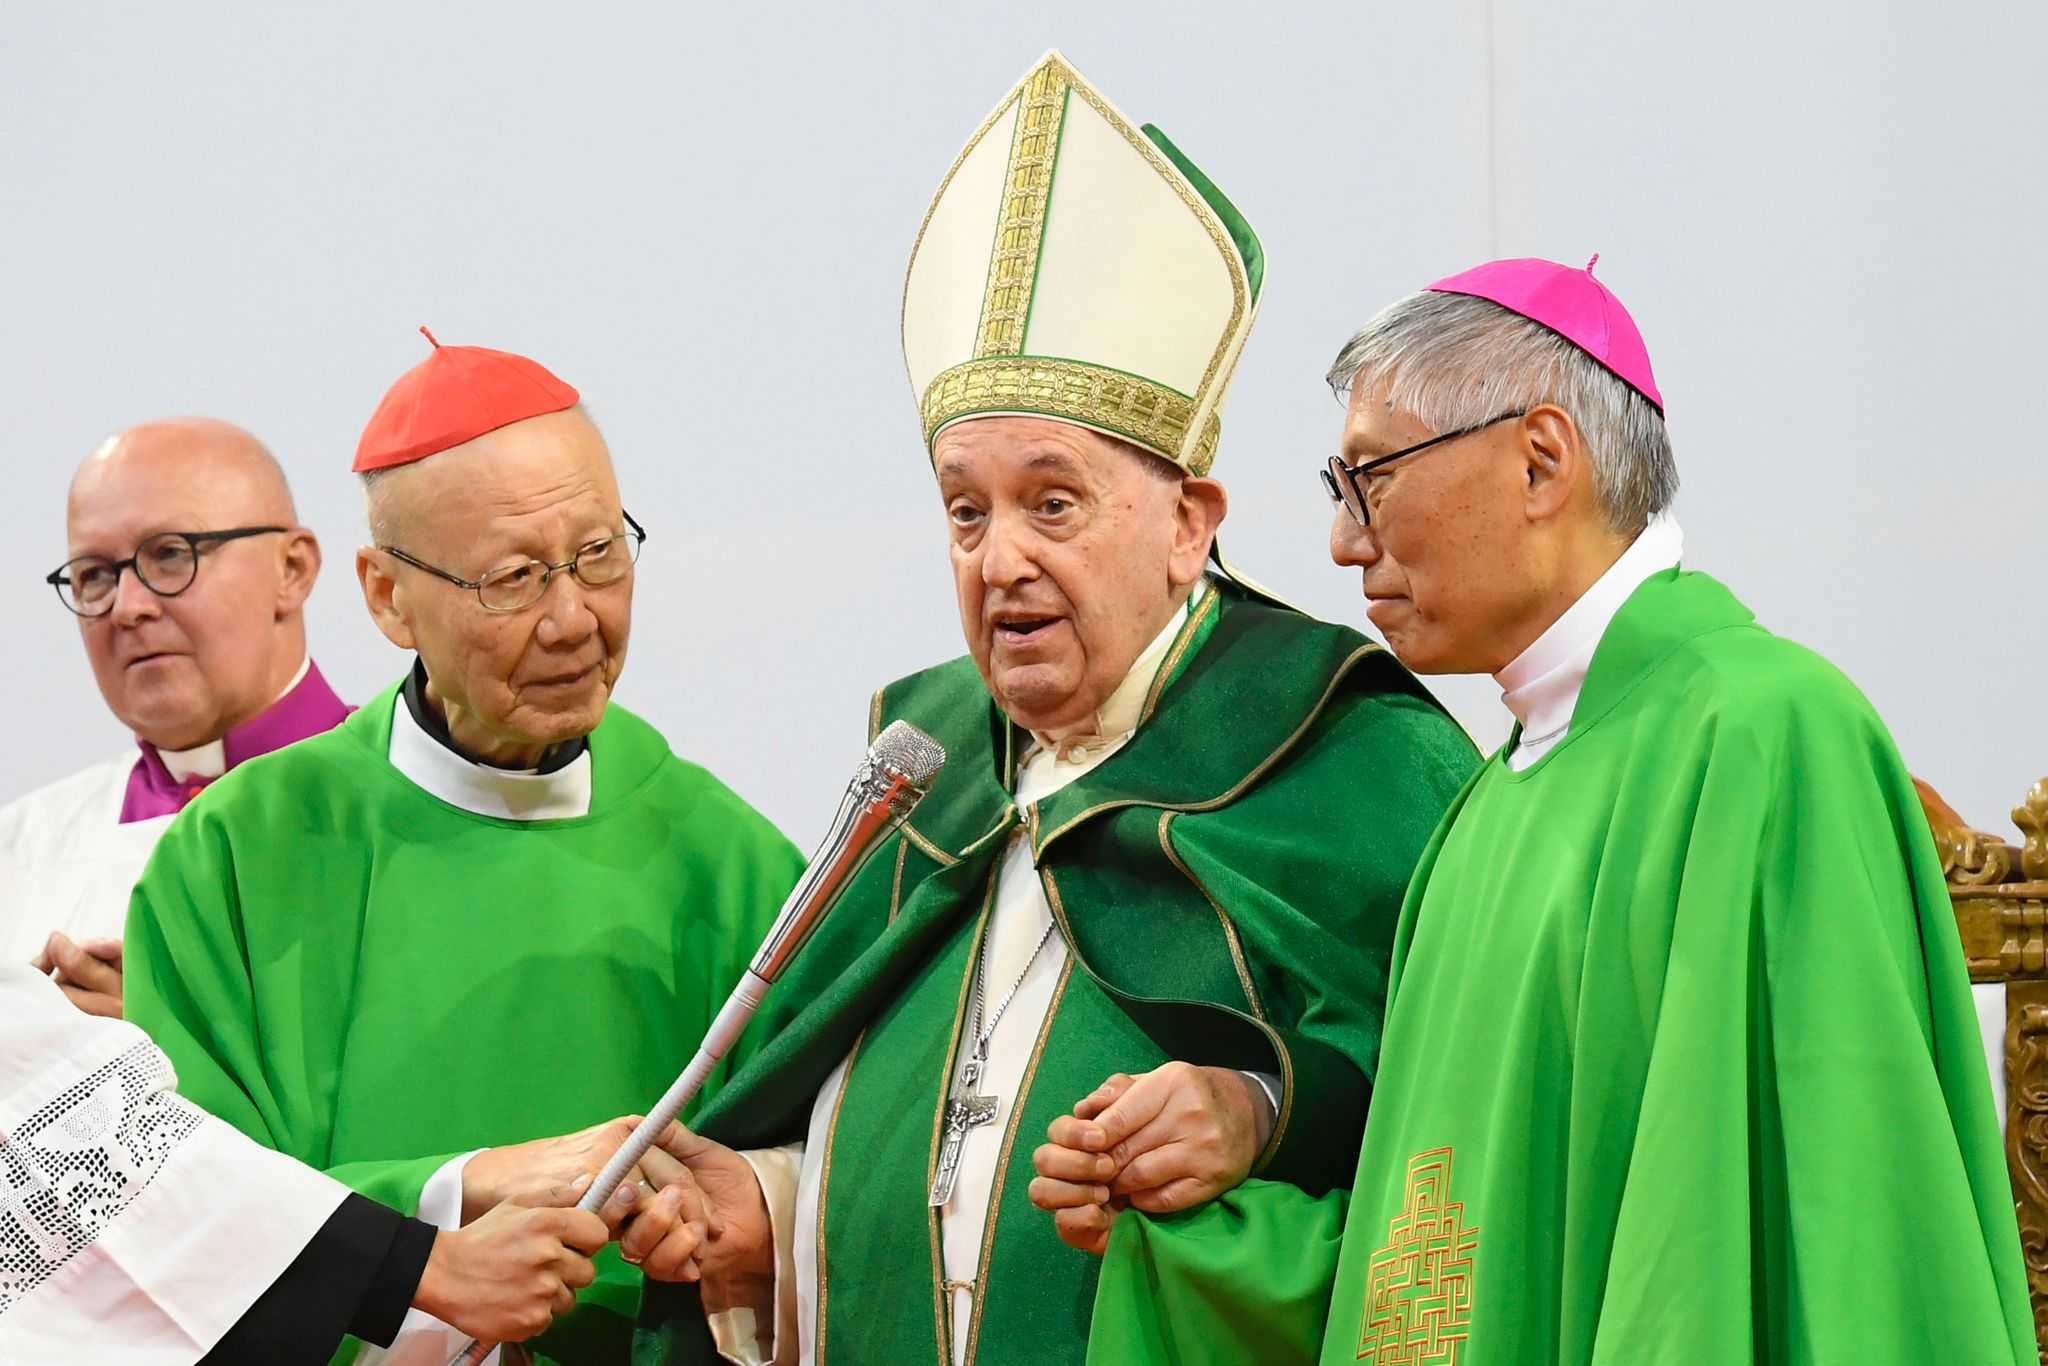 Blessing of same-sex unions, possible – Pope Francis